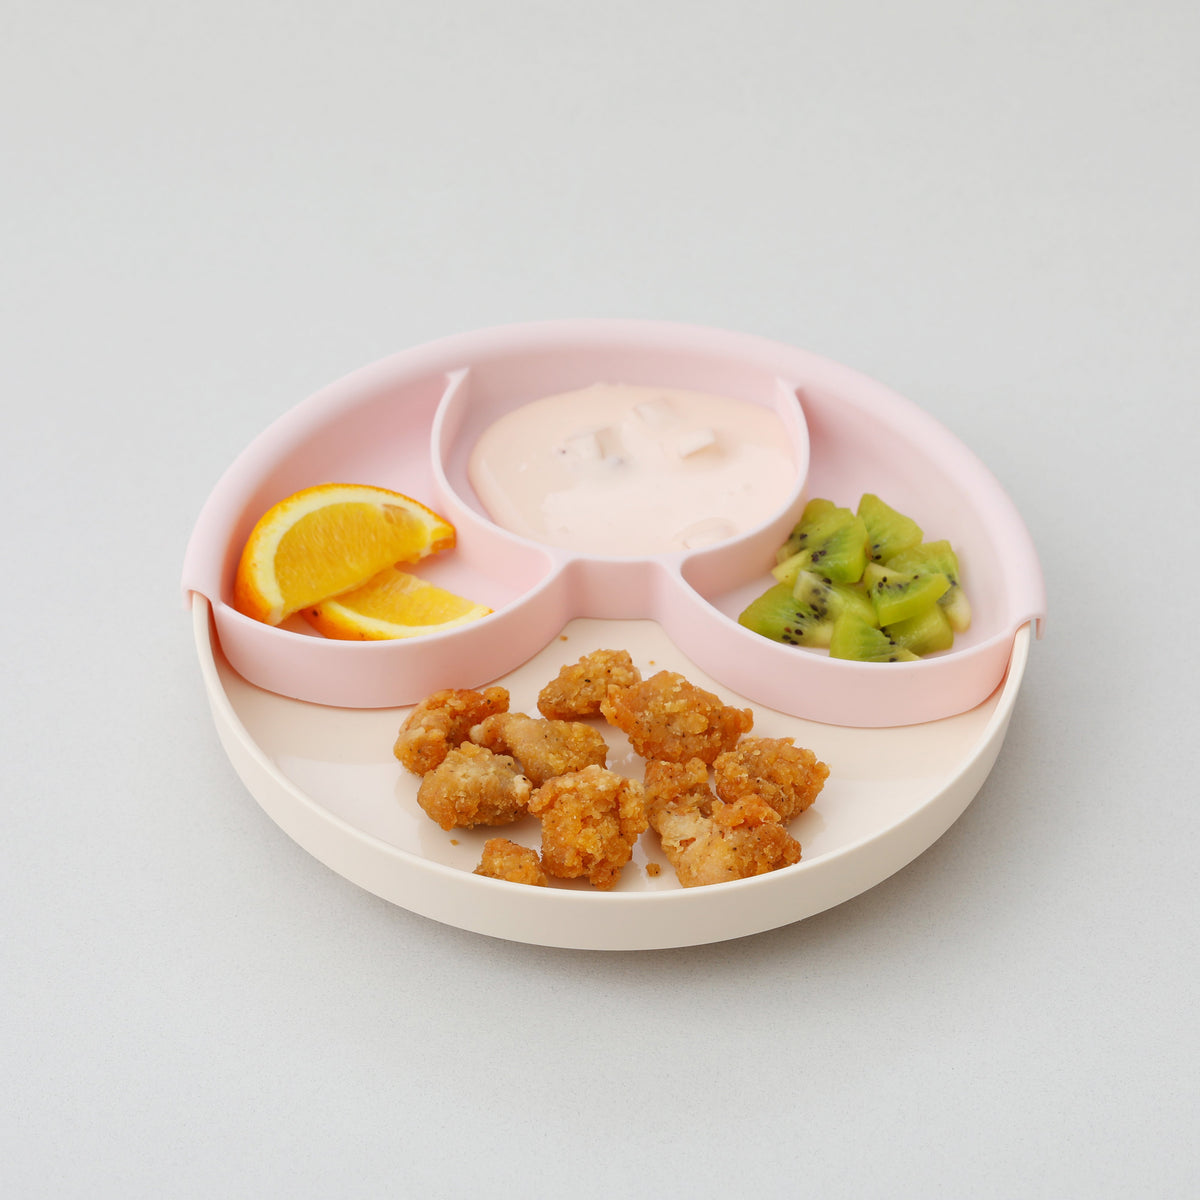 miniware-healthy-meal-set-pla-smart-divider-suction-plate-in-vanilla-+-silicone-divider-in-peach- (14)